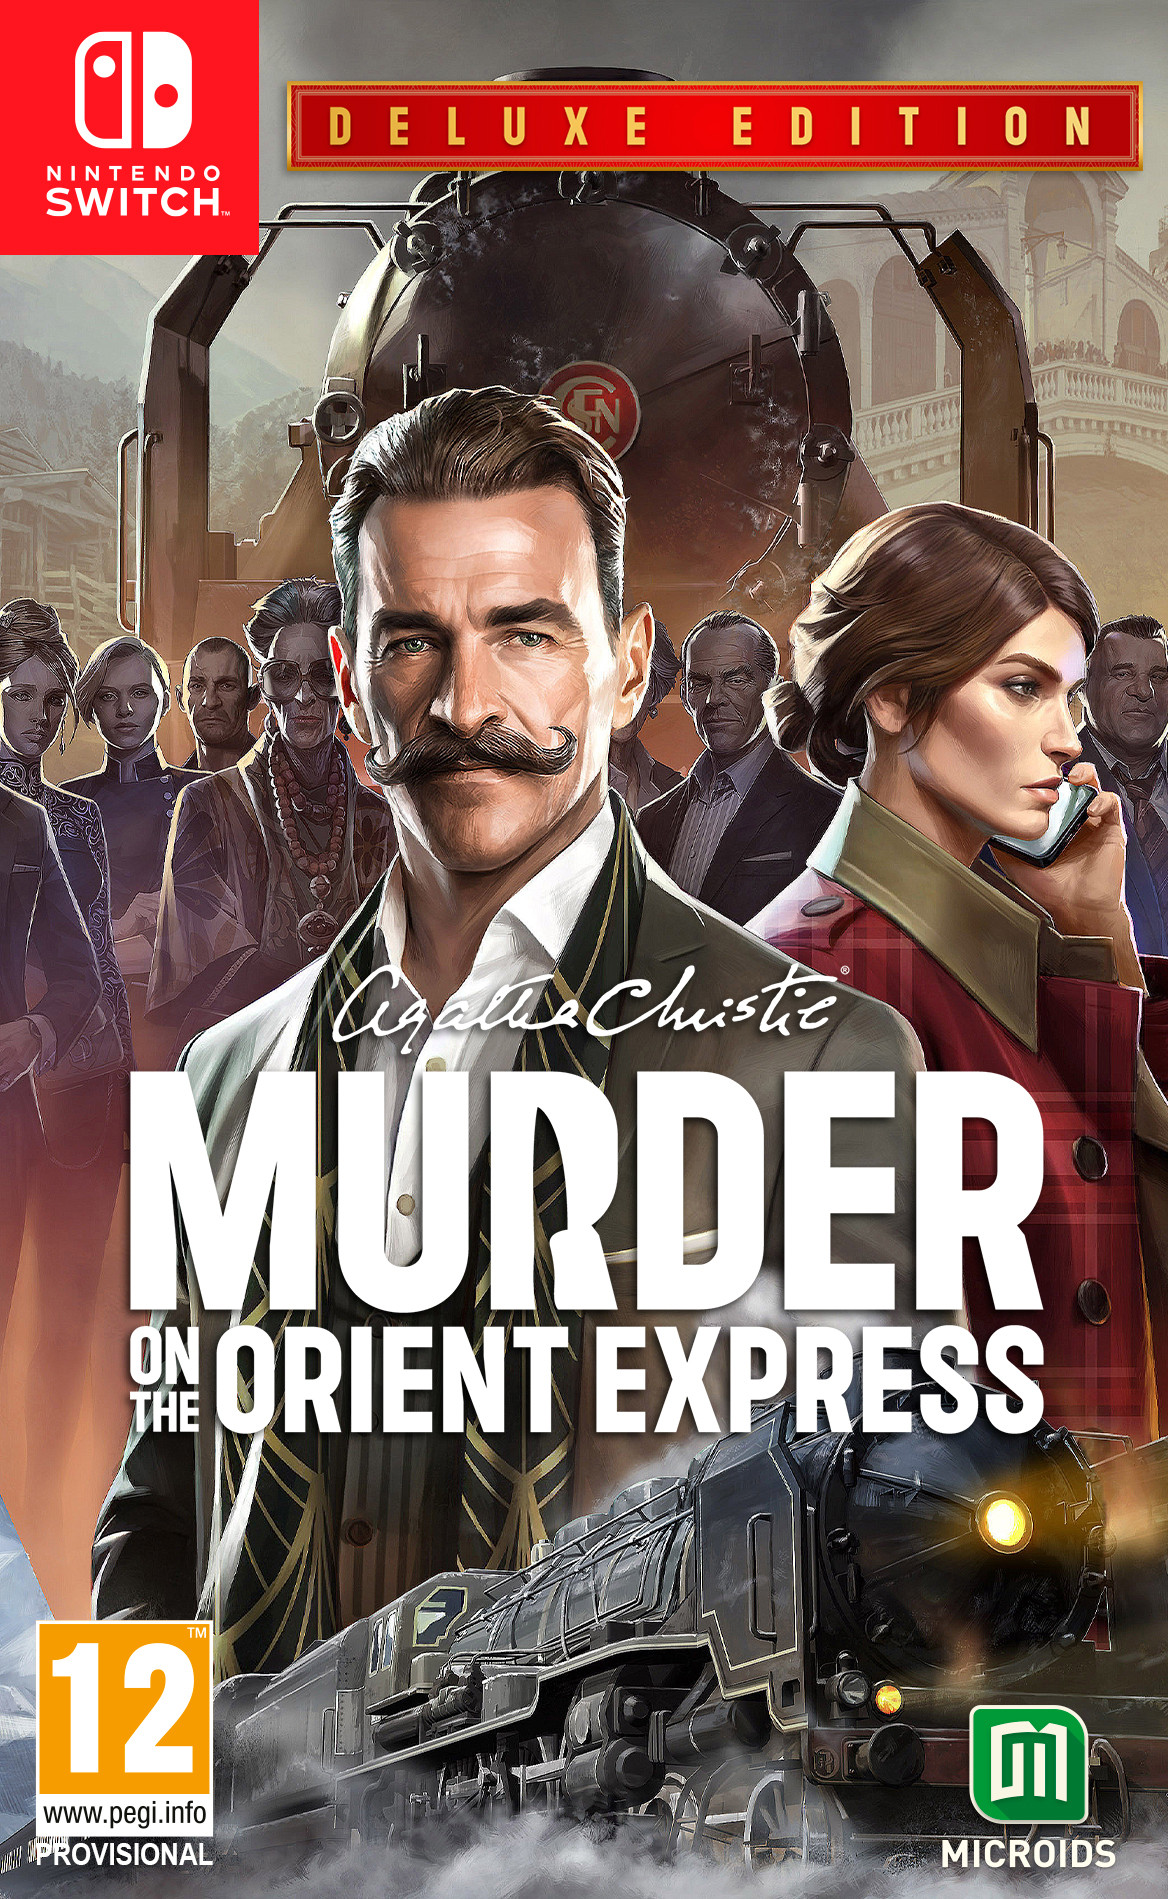 Agatha Christie: Murder on the Orient Express - Deluxe Edition (Switch), Microids